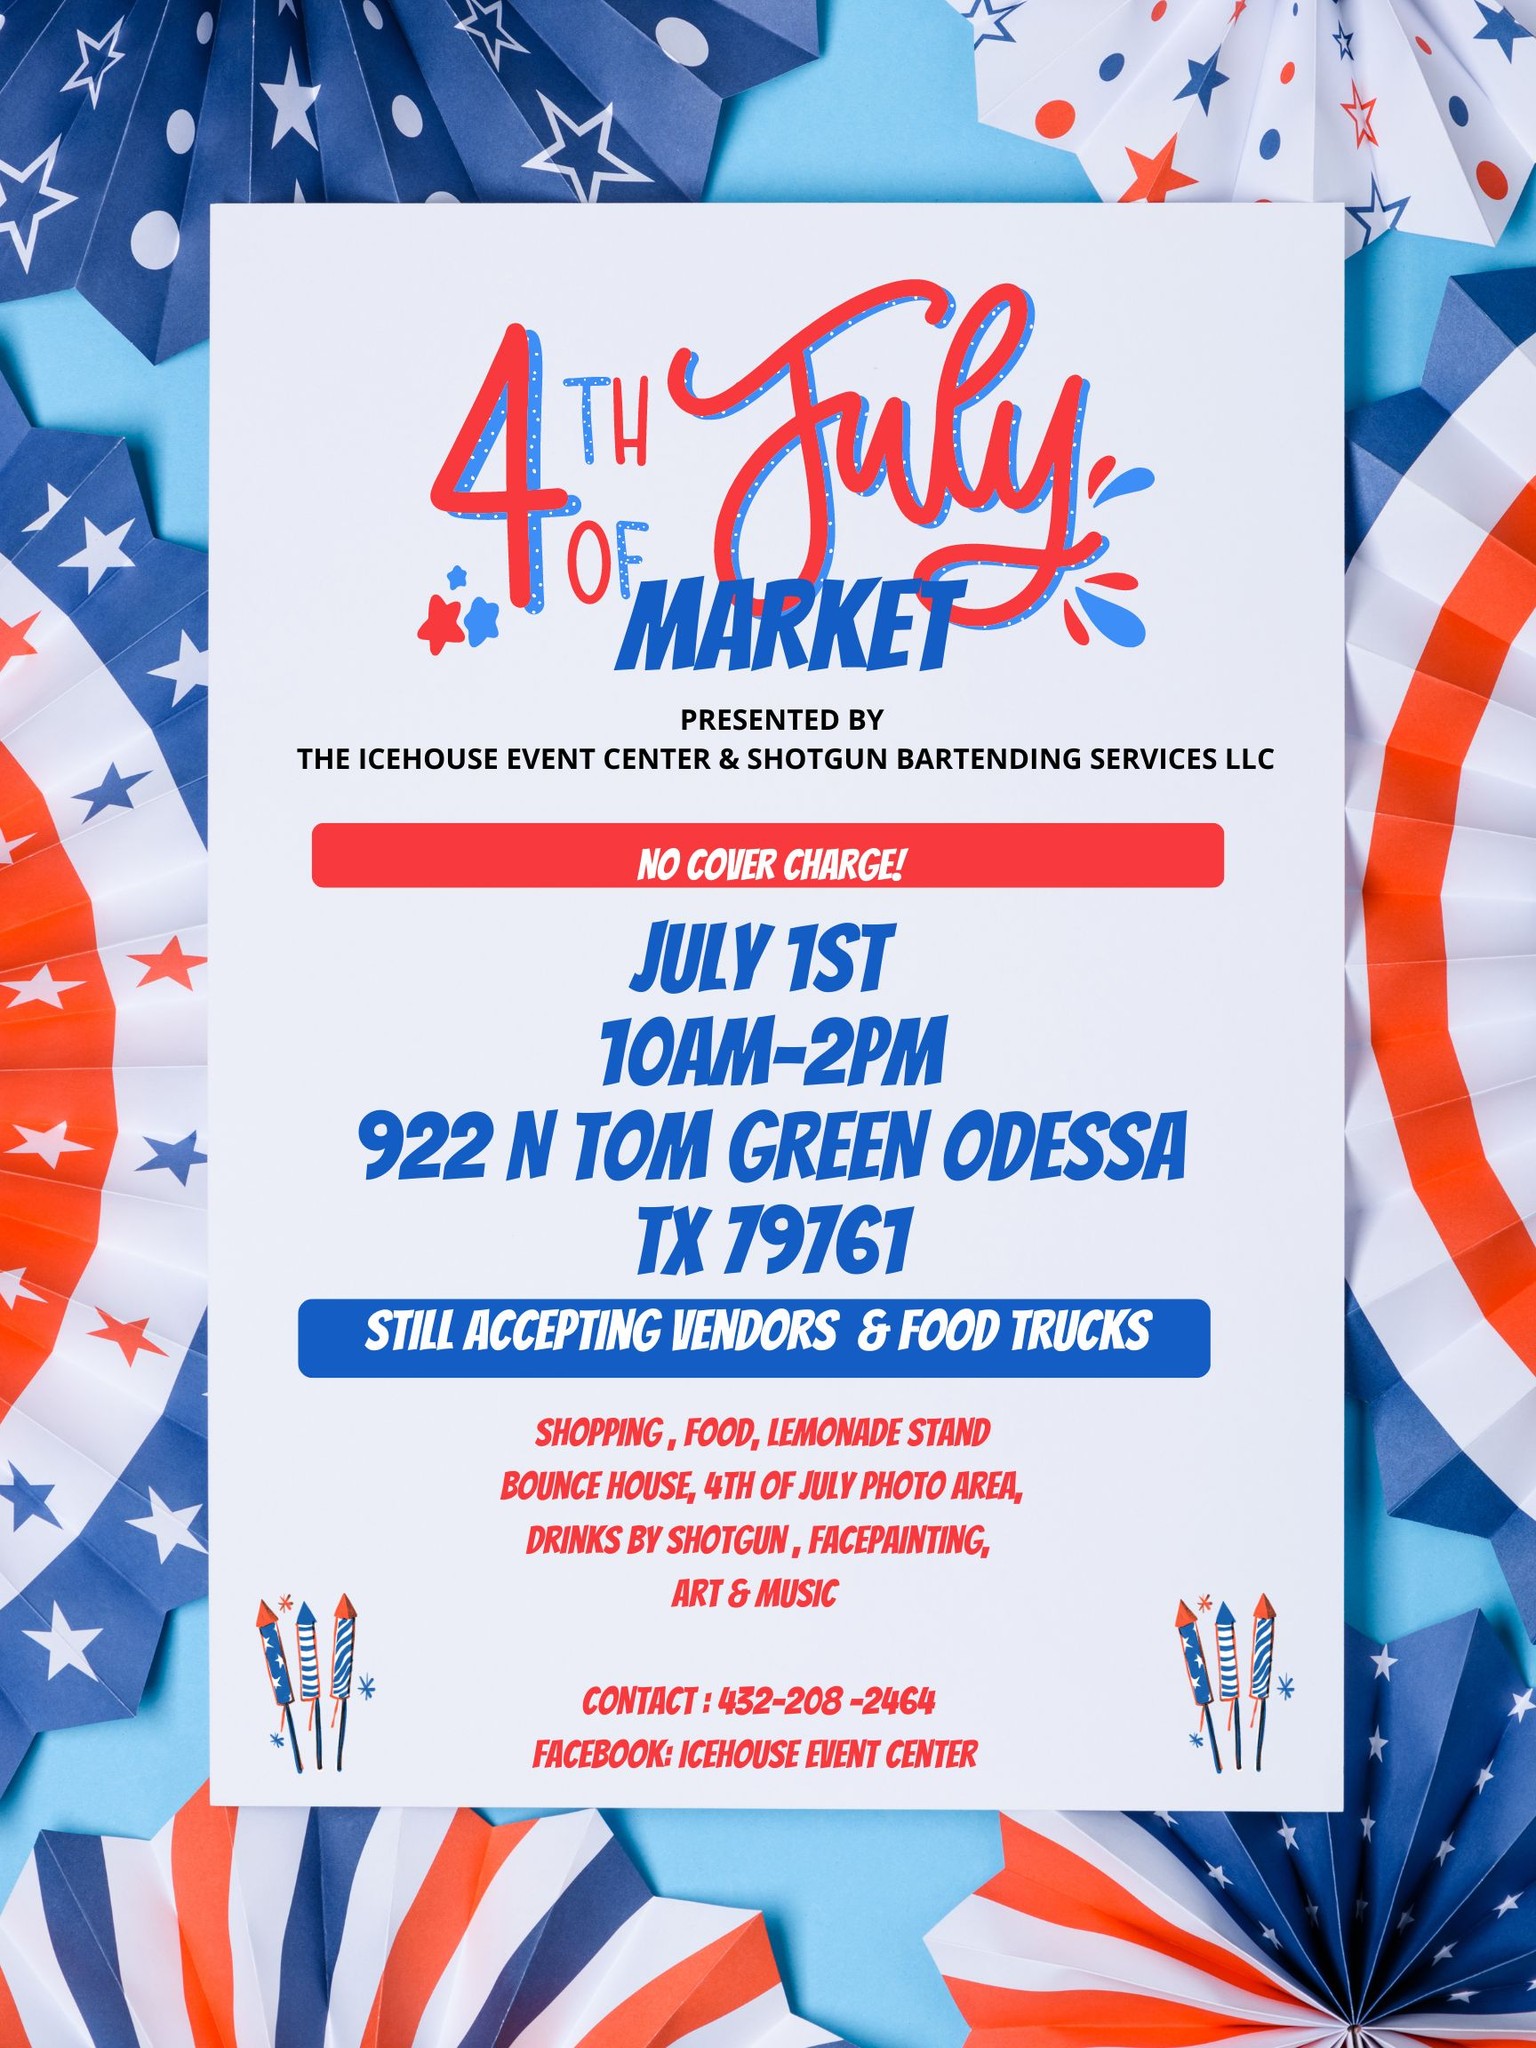 Fourth of July Market by Ice House Event Center